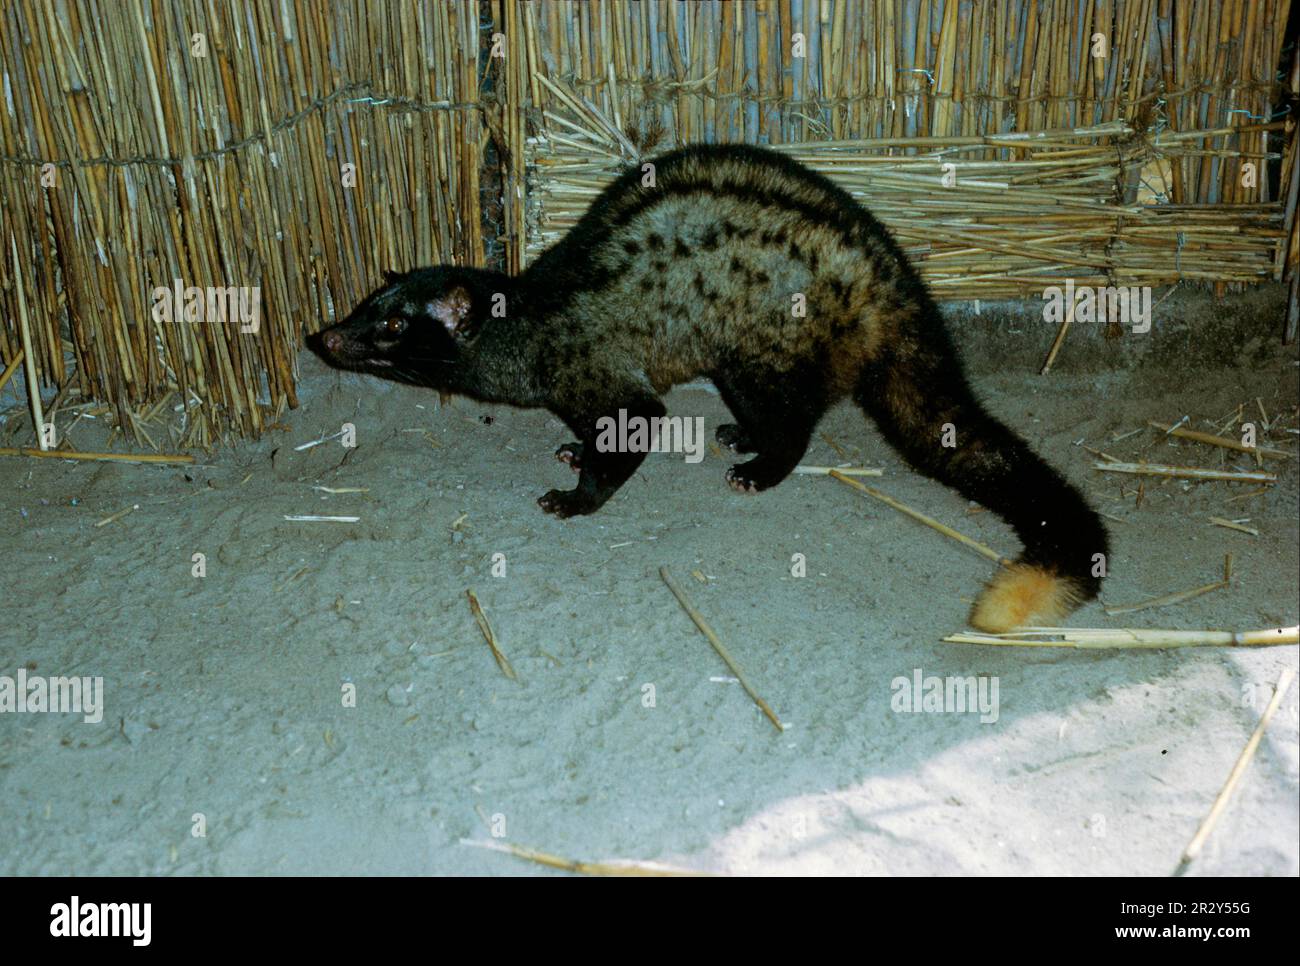 Spotted Musang, Spotted Musangs, Palm Civet, Indonesian Palm Roller, Palm Civets, Predators, Mammals, Sneaky Cats, Animals, Common Palm Civet Stock Photo